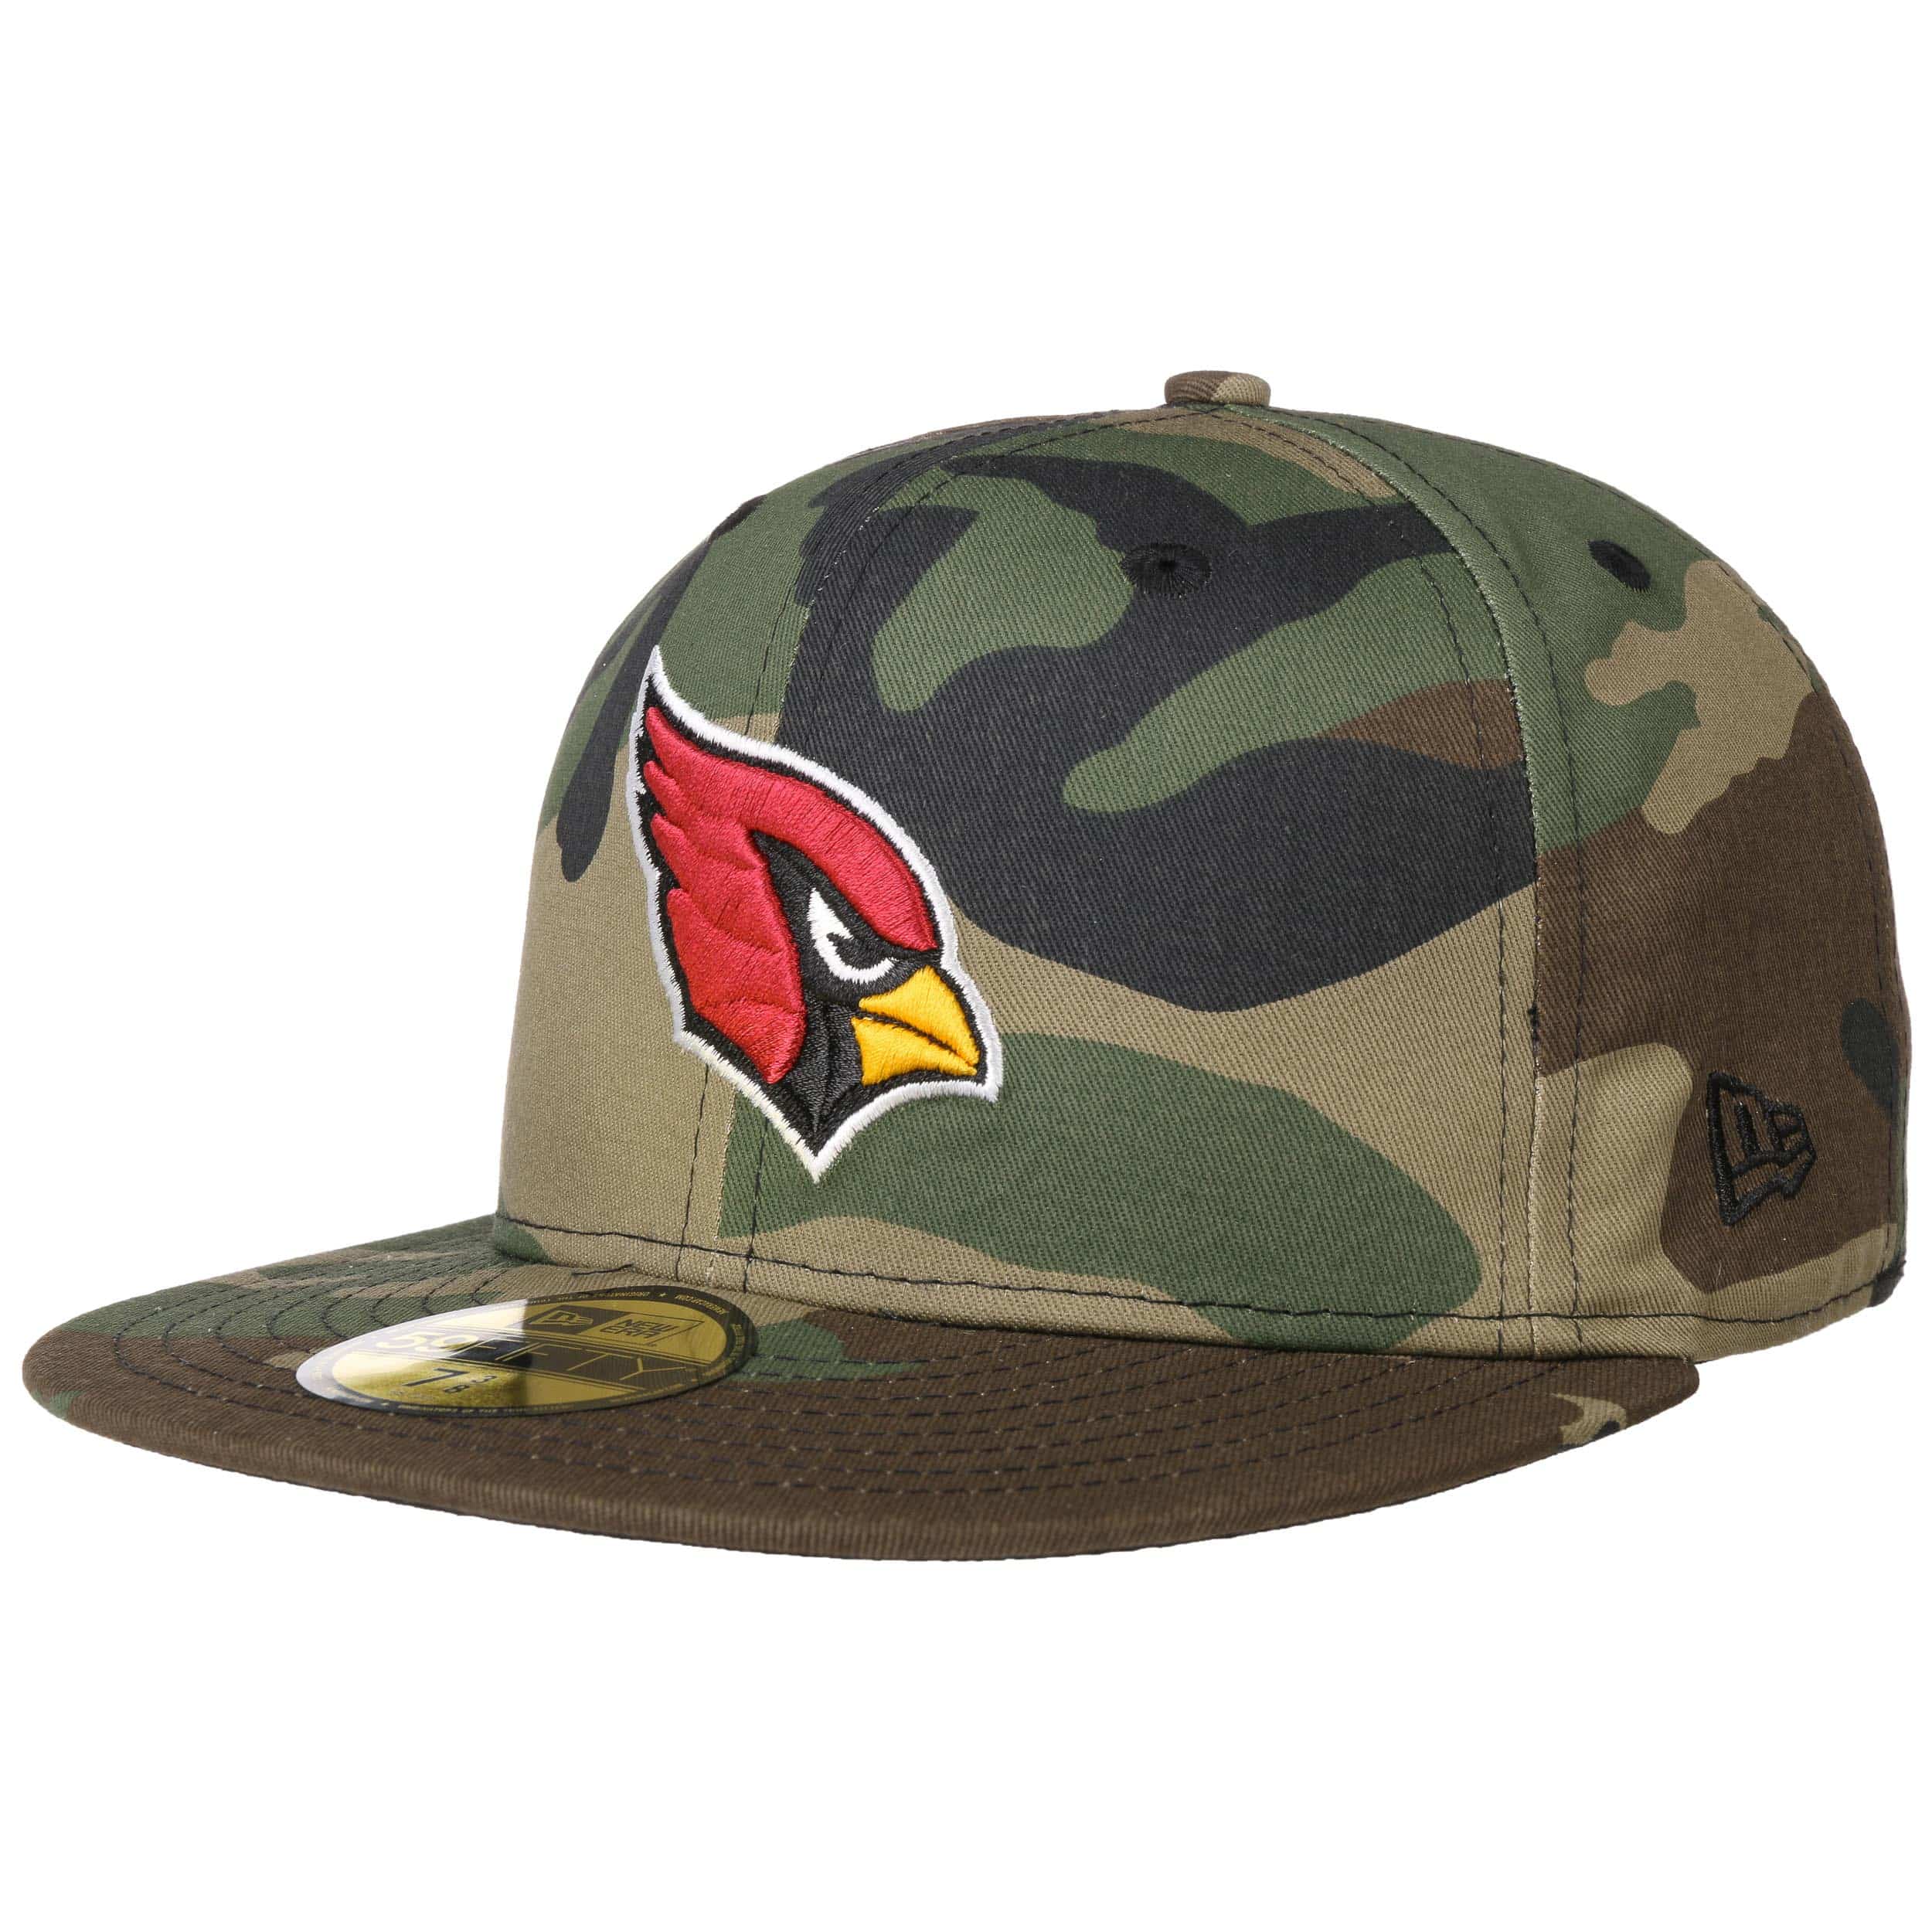 New Era 59fifty Blank Realtree Camo Fitted Hat